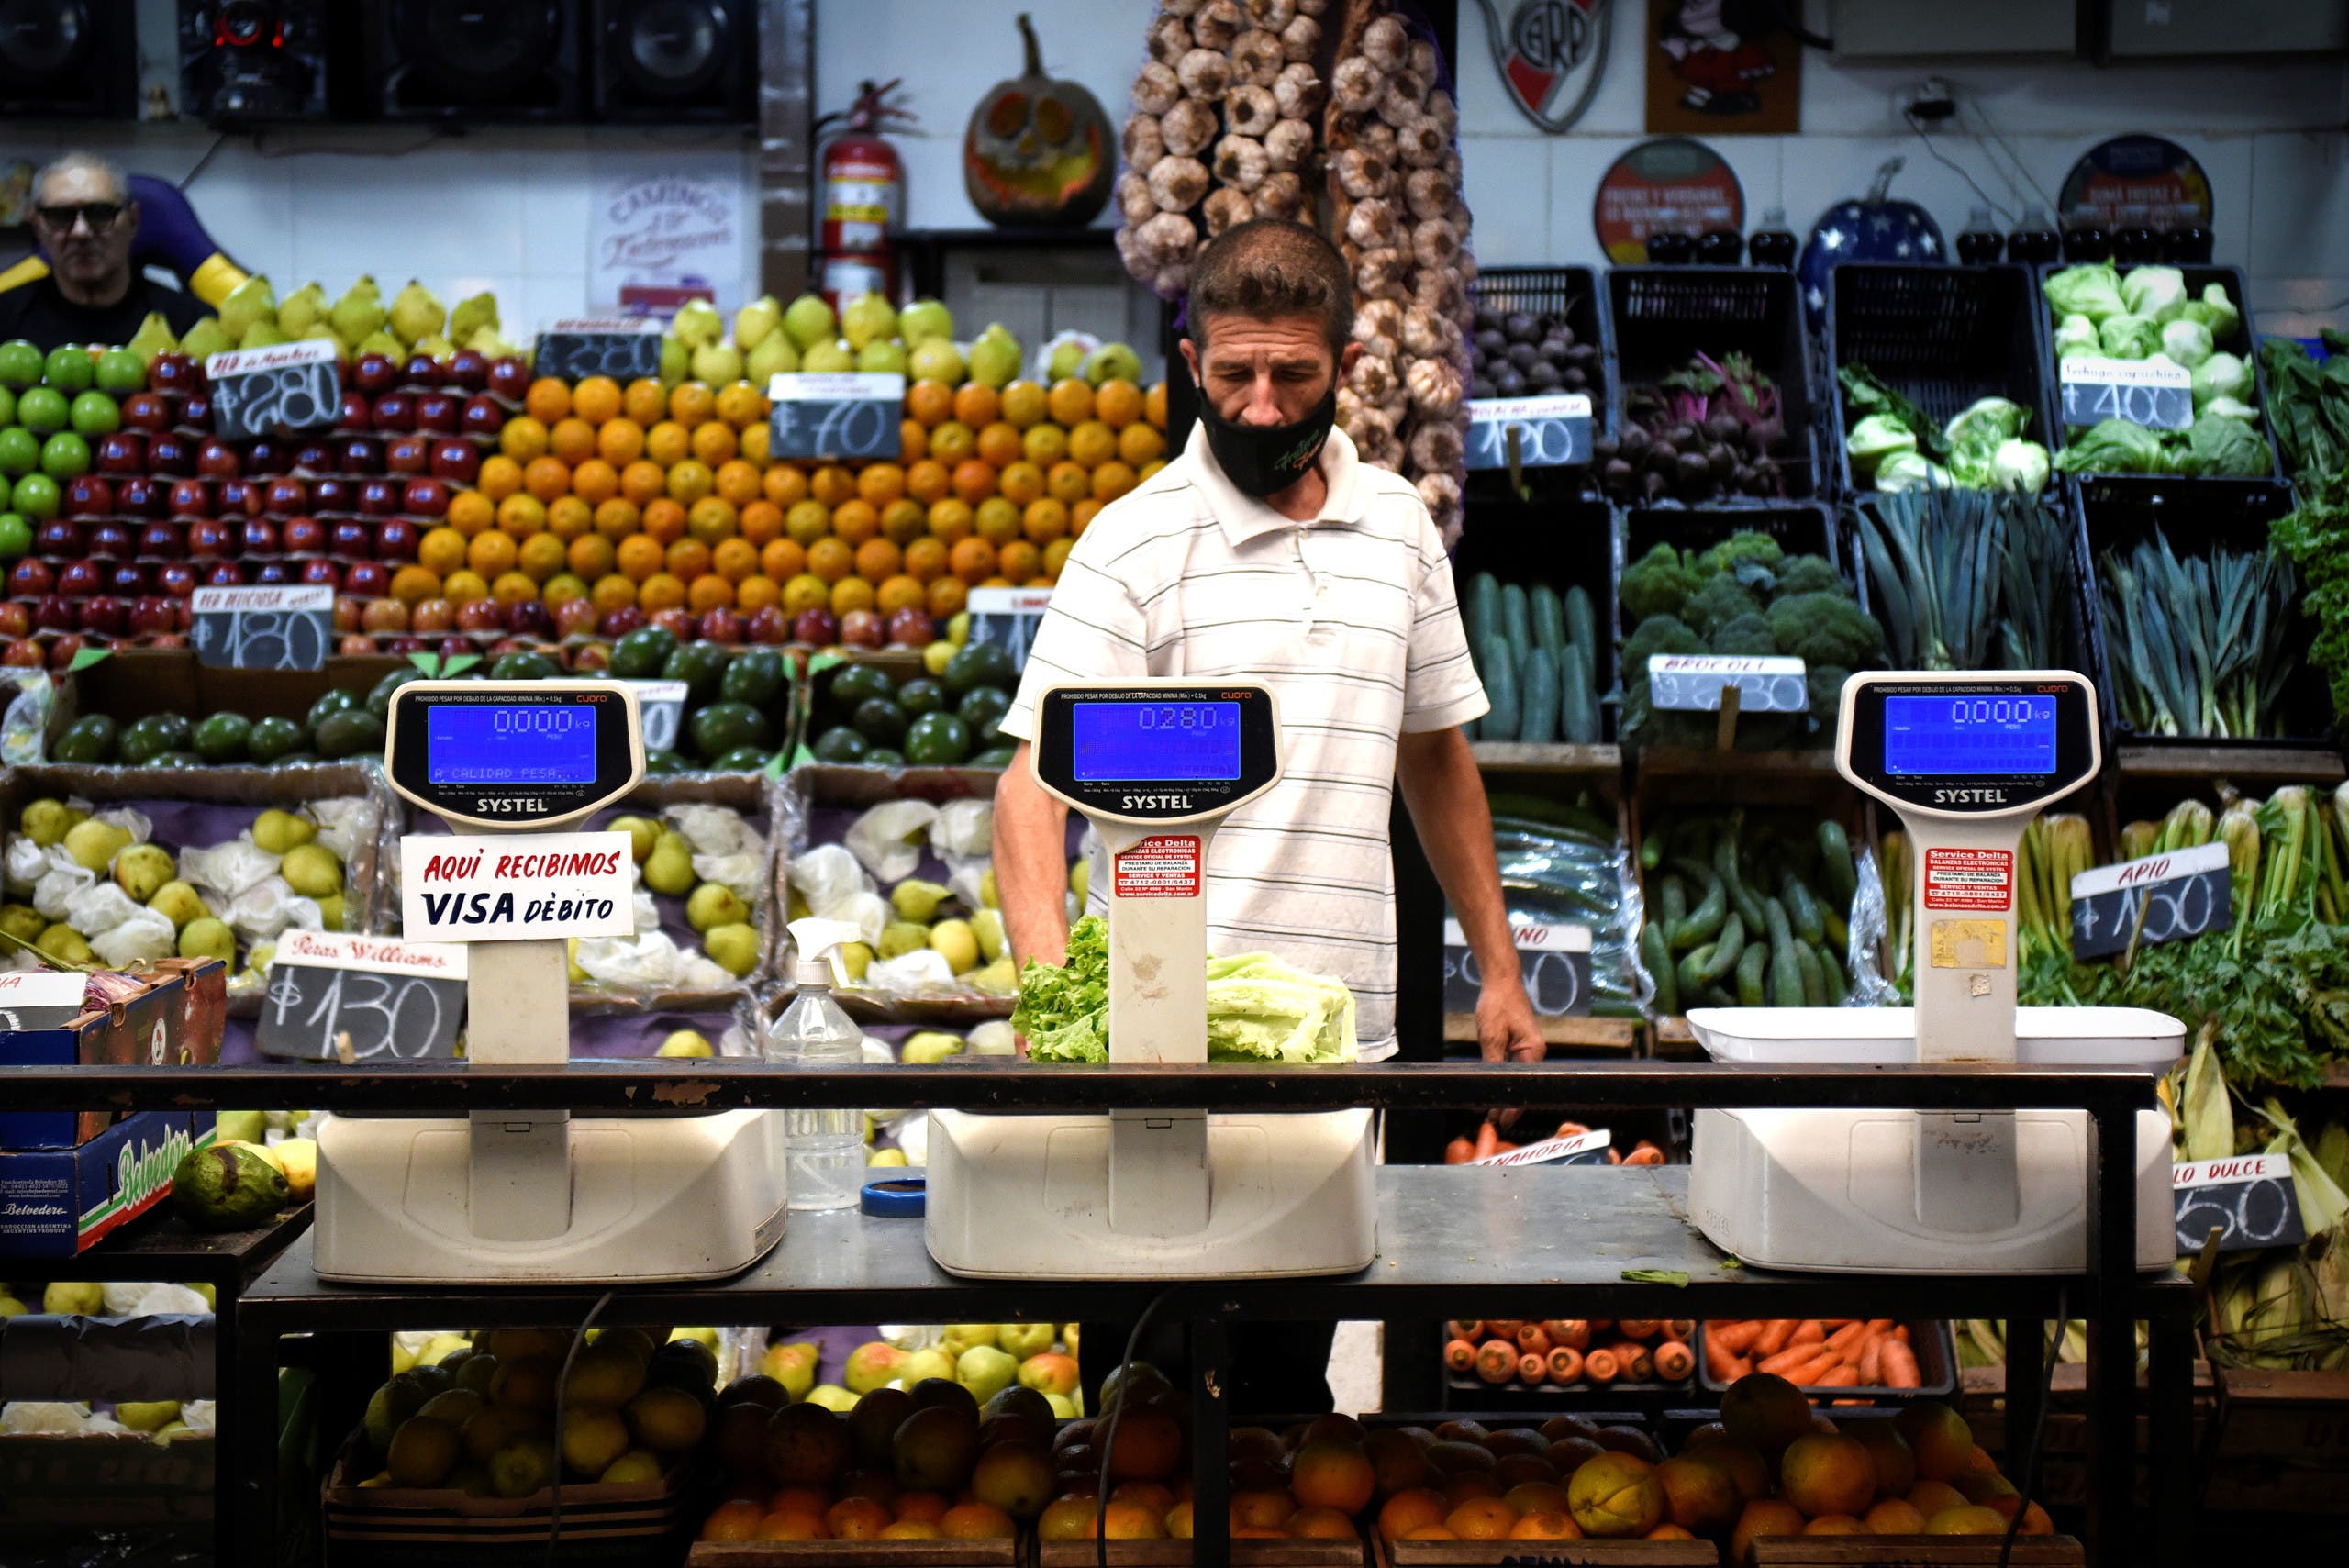 A vendor weighs produce in a market as inflation in Argentina hits its highest level in years, causing food prices to spiral, in Buenos Aires, Argentina April 12, 2022. Picture taken April 12, 2022. (Reuters)